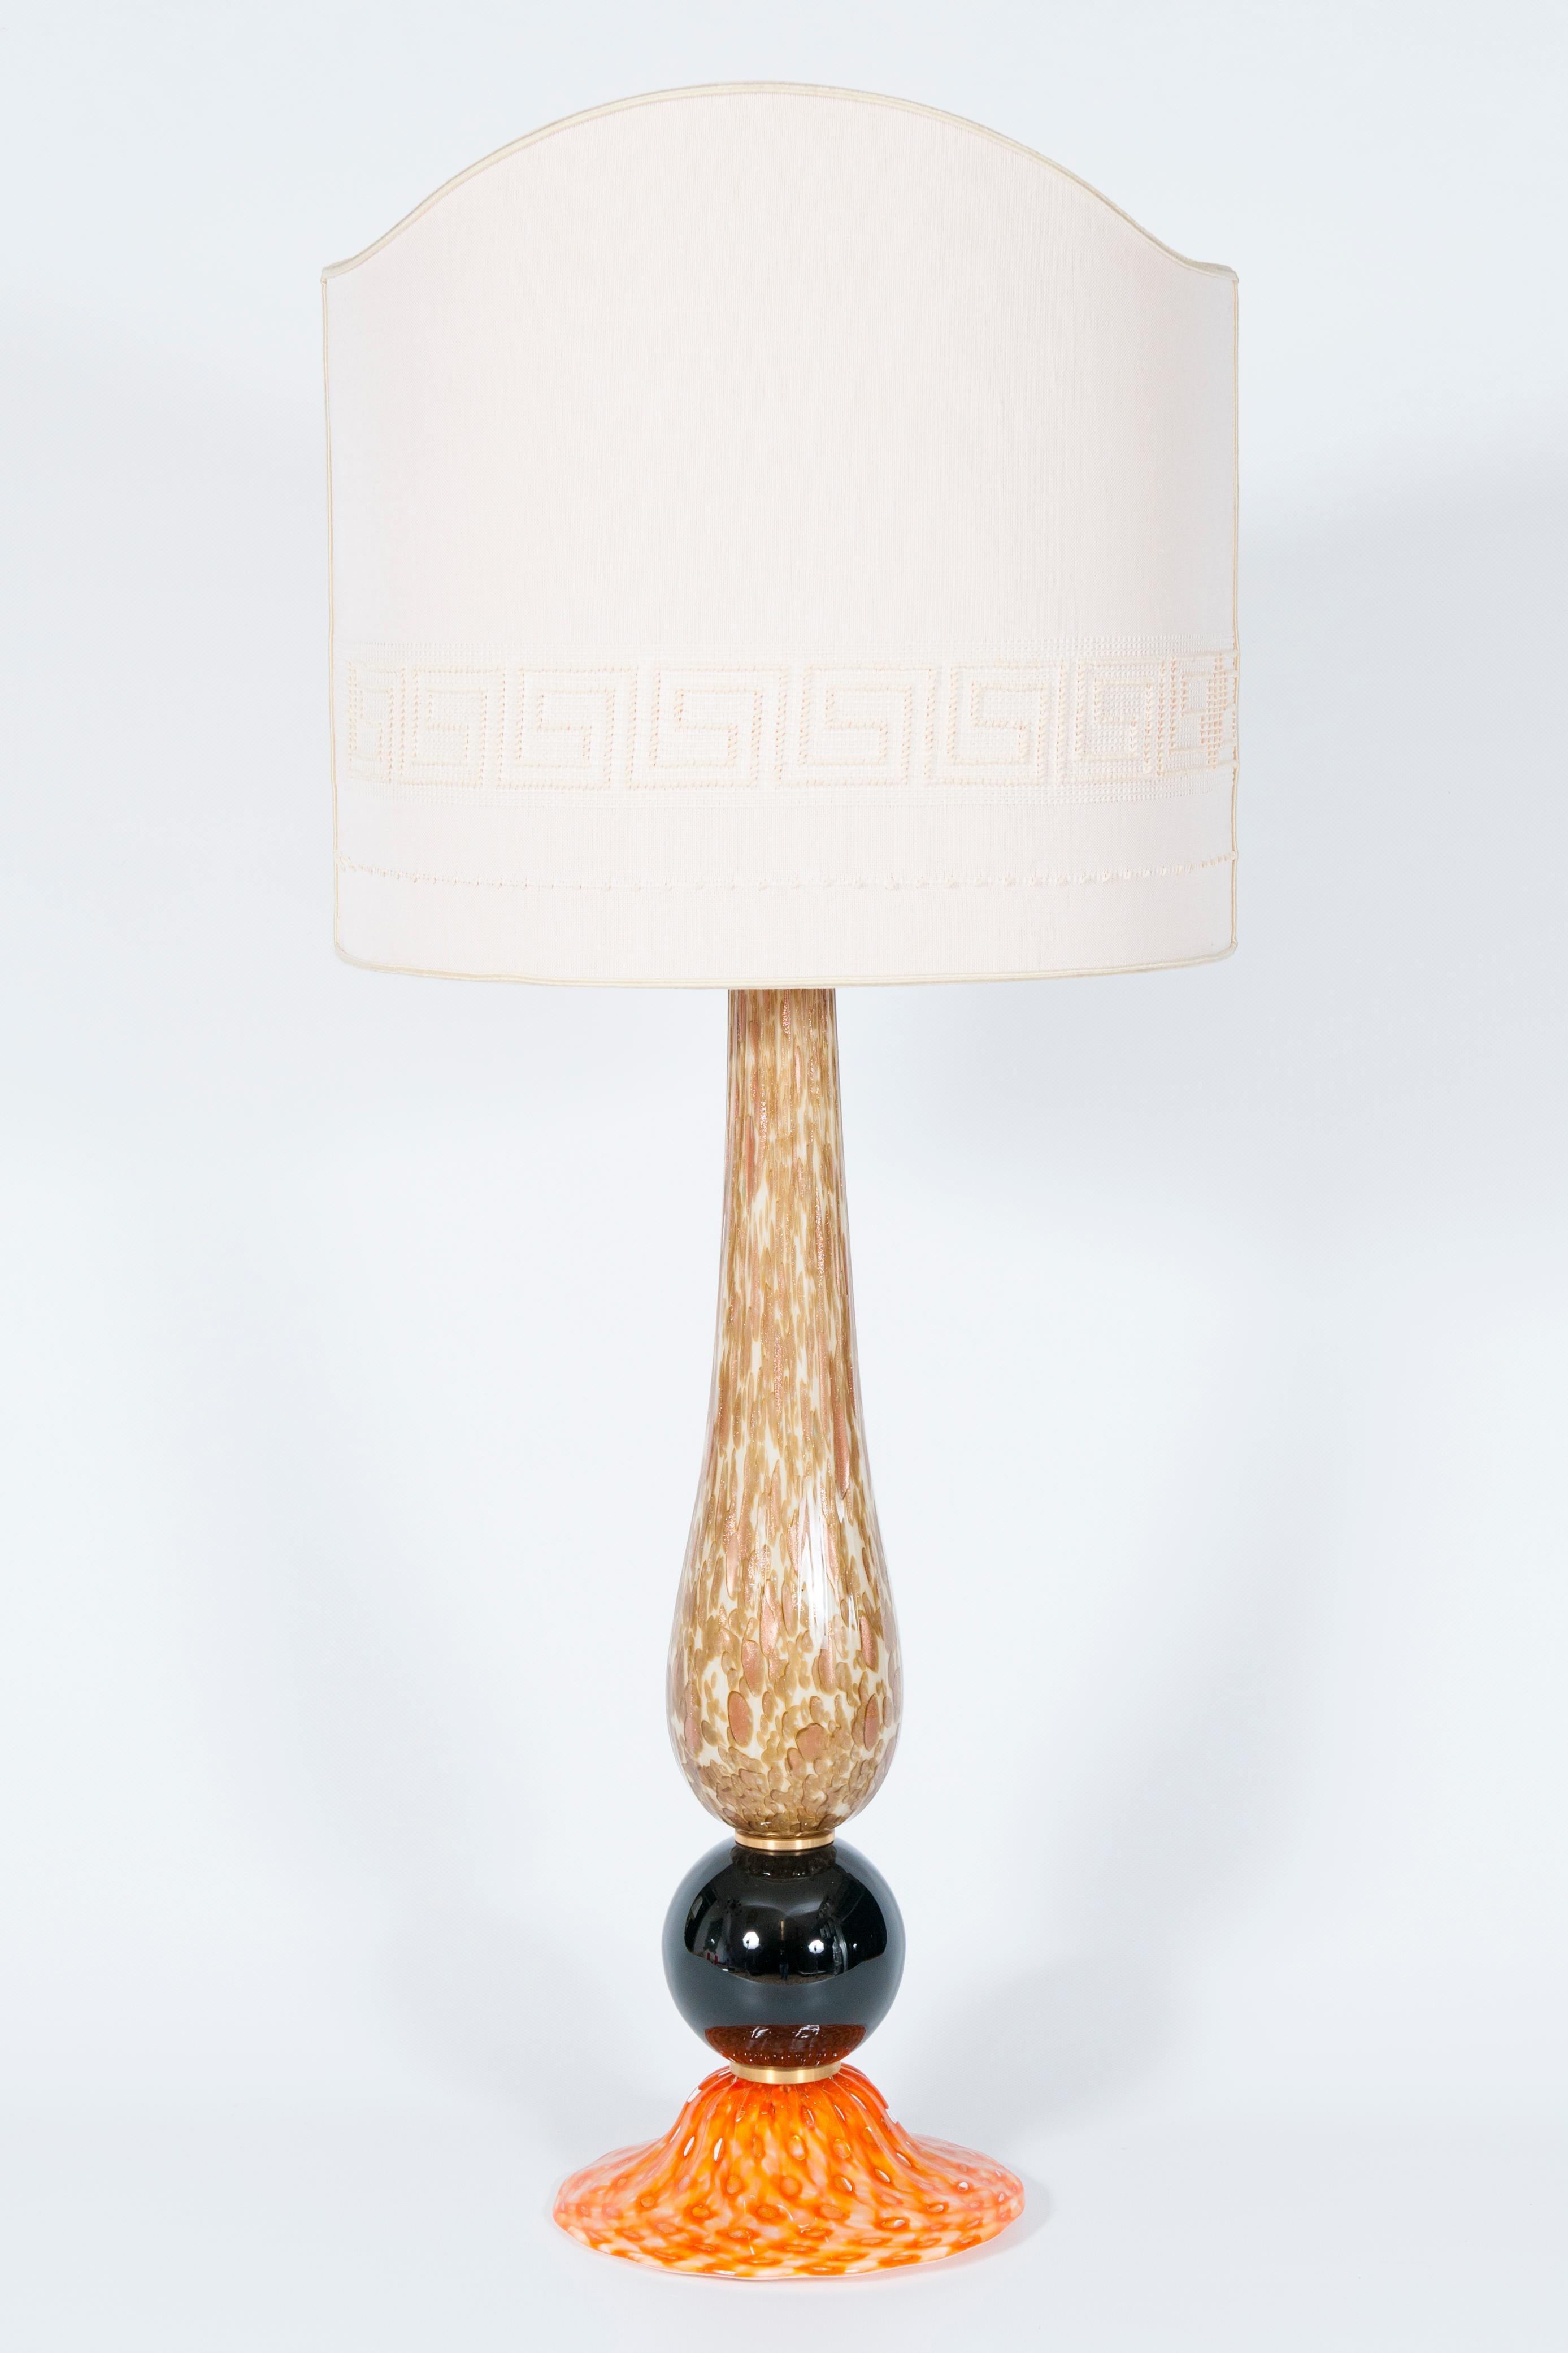 Murano Table Lamp vibrant Orange basement Brown & White stem 1980s Italy.
A mesmerizing table lamp fashioned from original blown Murano glass, meticulously crafted by the Italian artist Giovanni Dalla Fina artisans upholding the legacy of Murano